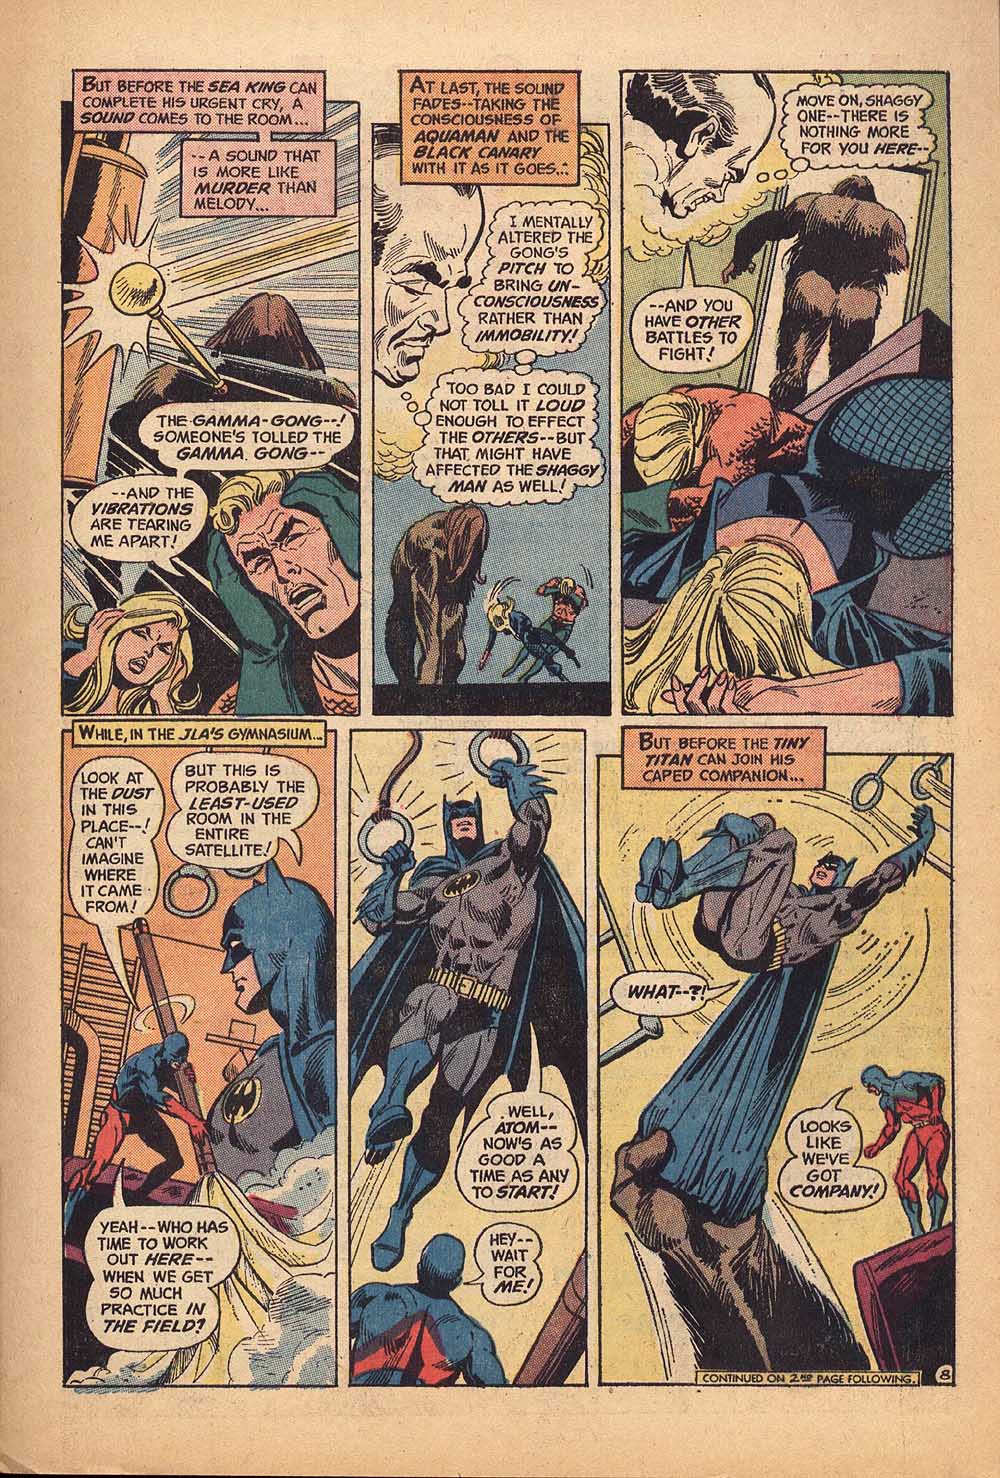 Justice League of America (1960) 104 Page 8